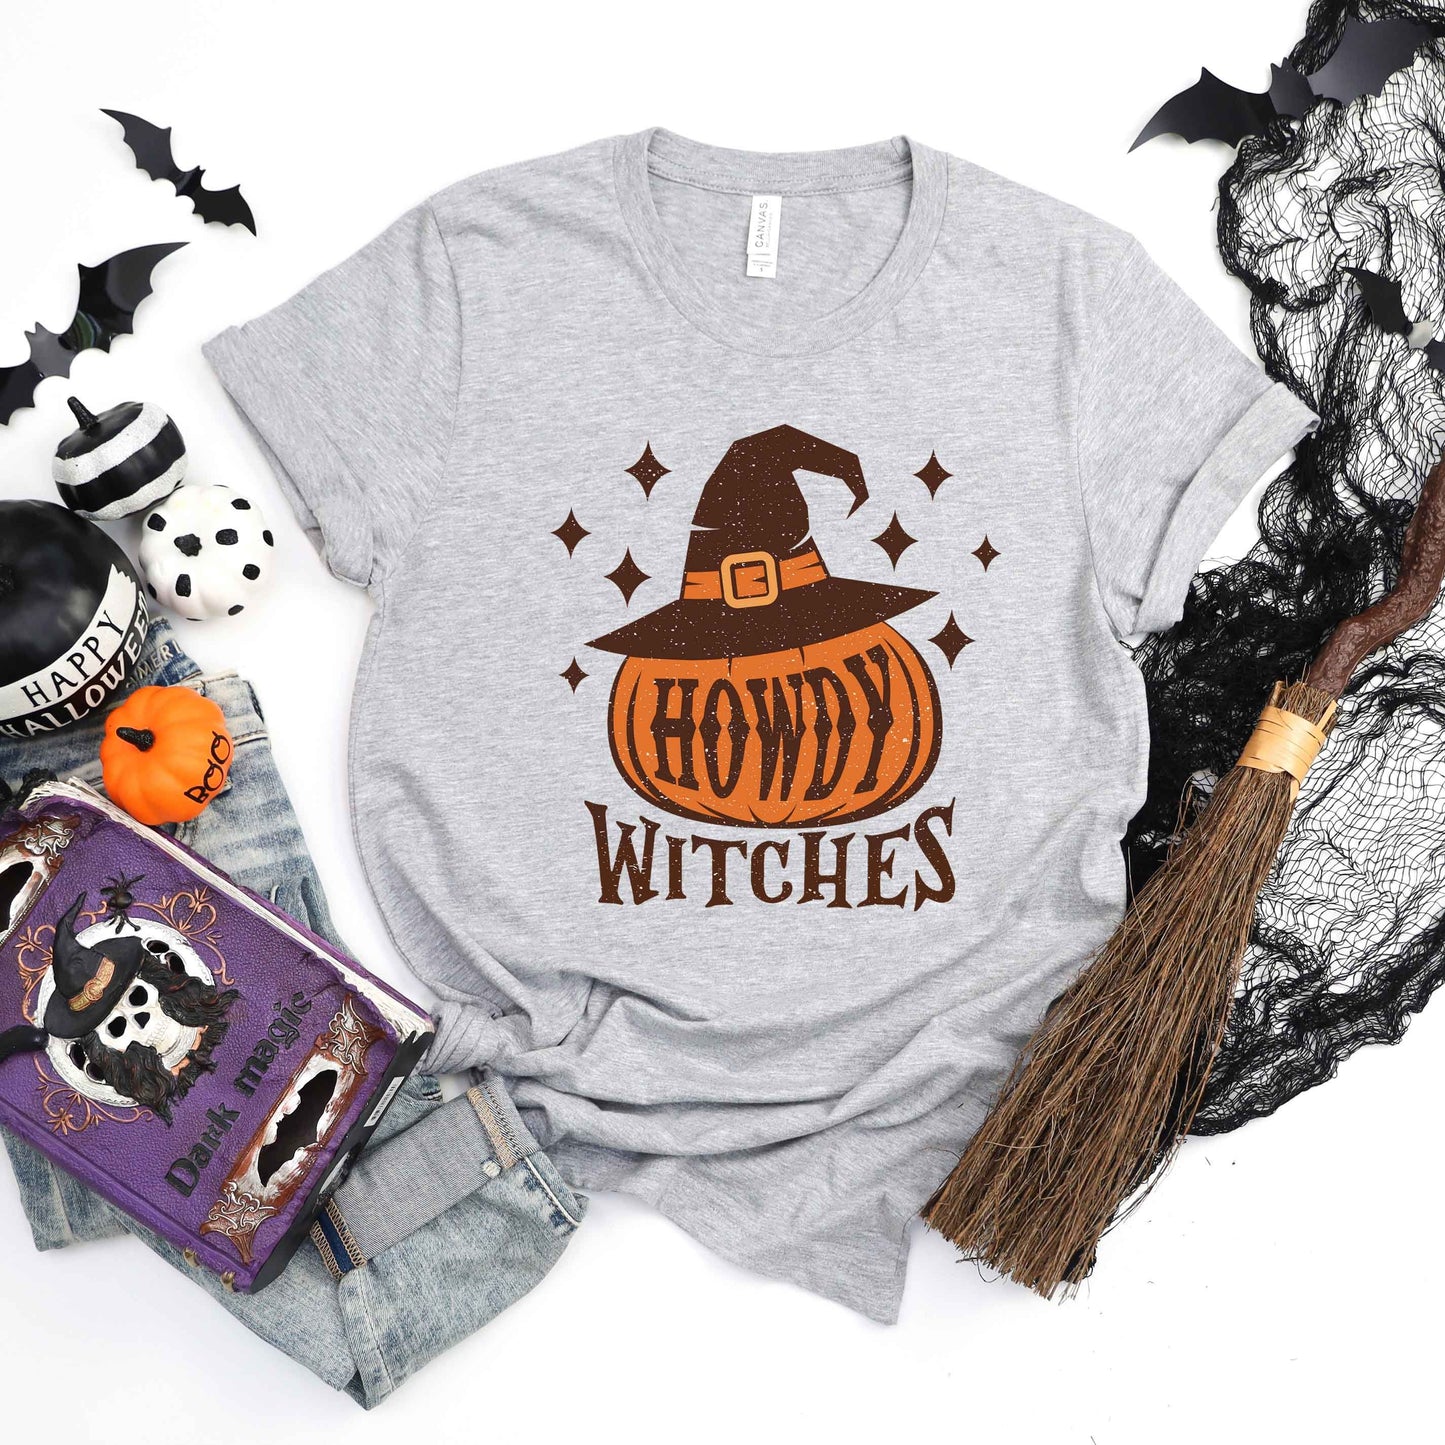 Howdy Witches Stars | Short Sleeve Crew Neck